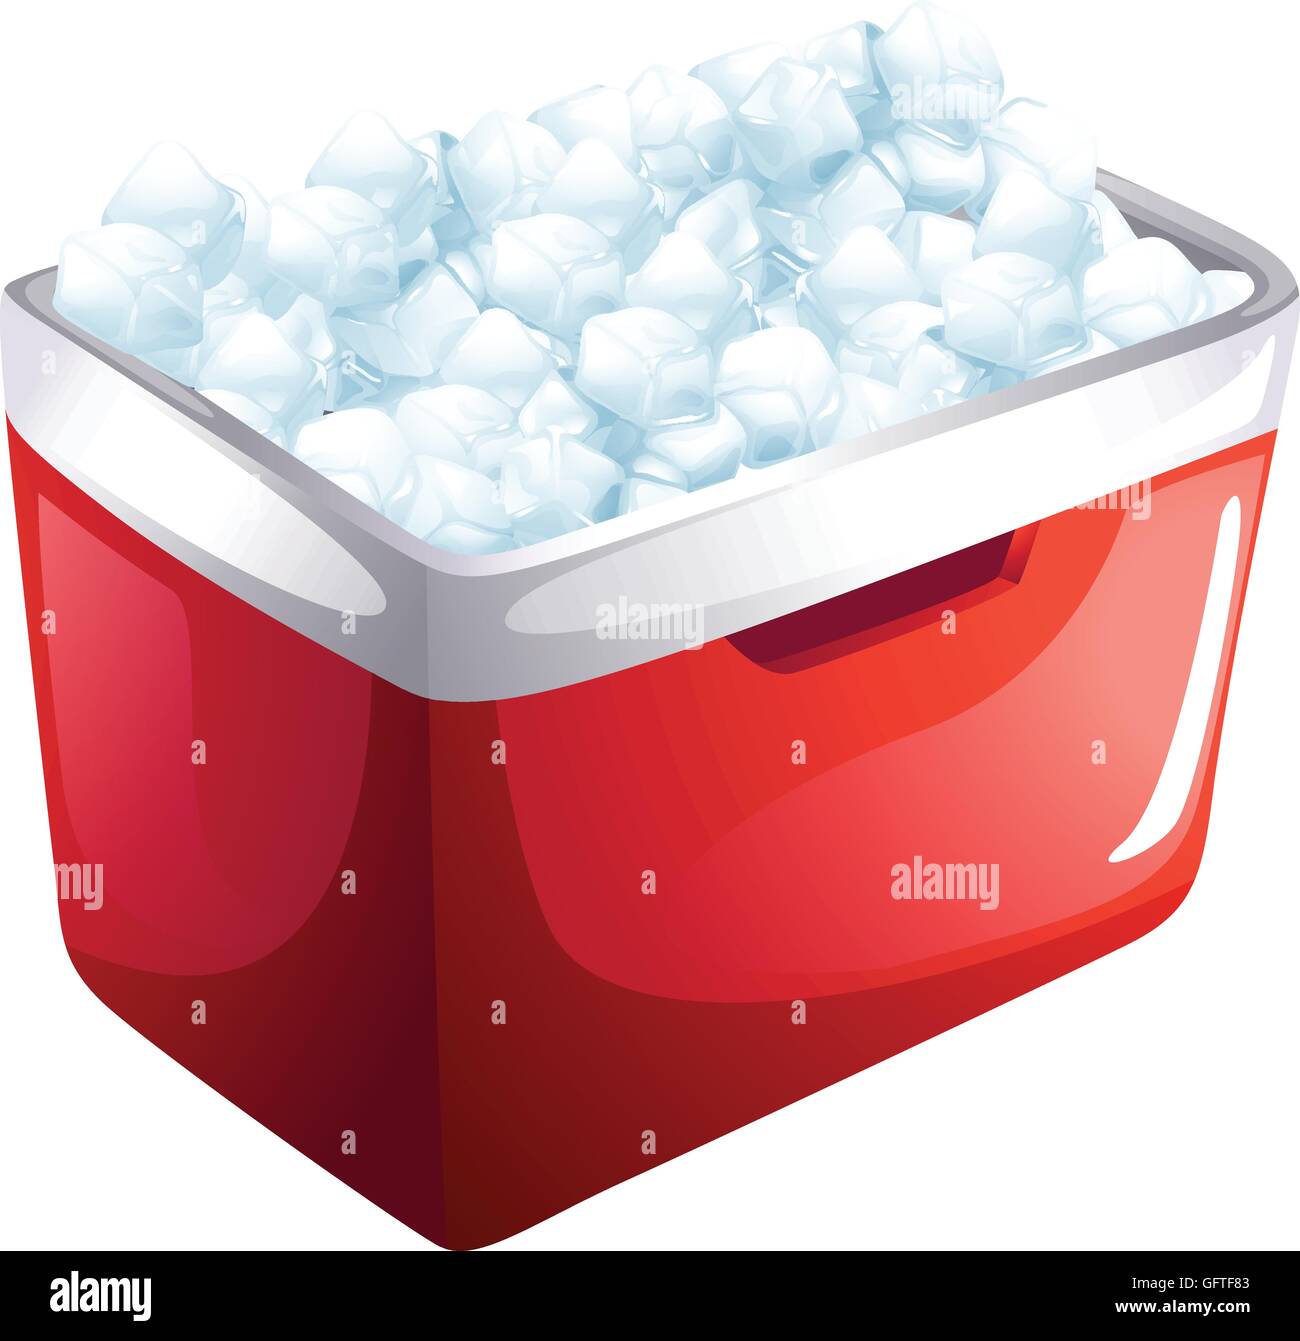 Red icebox full of ice illustration Stock Vector